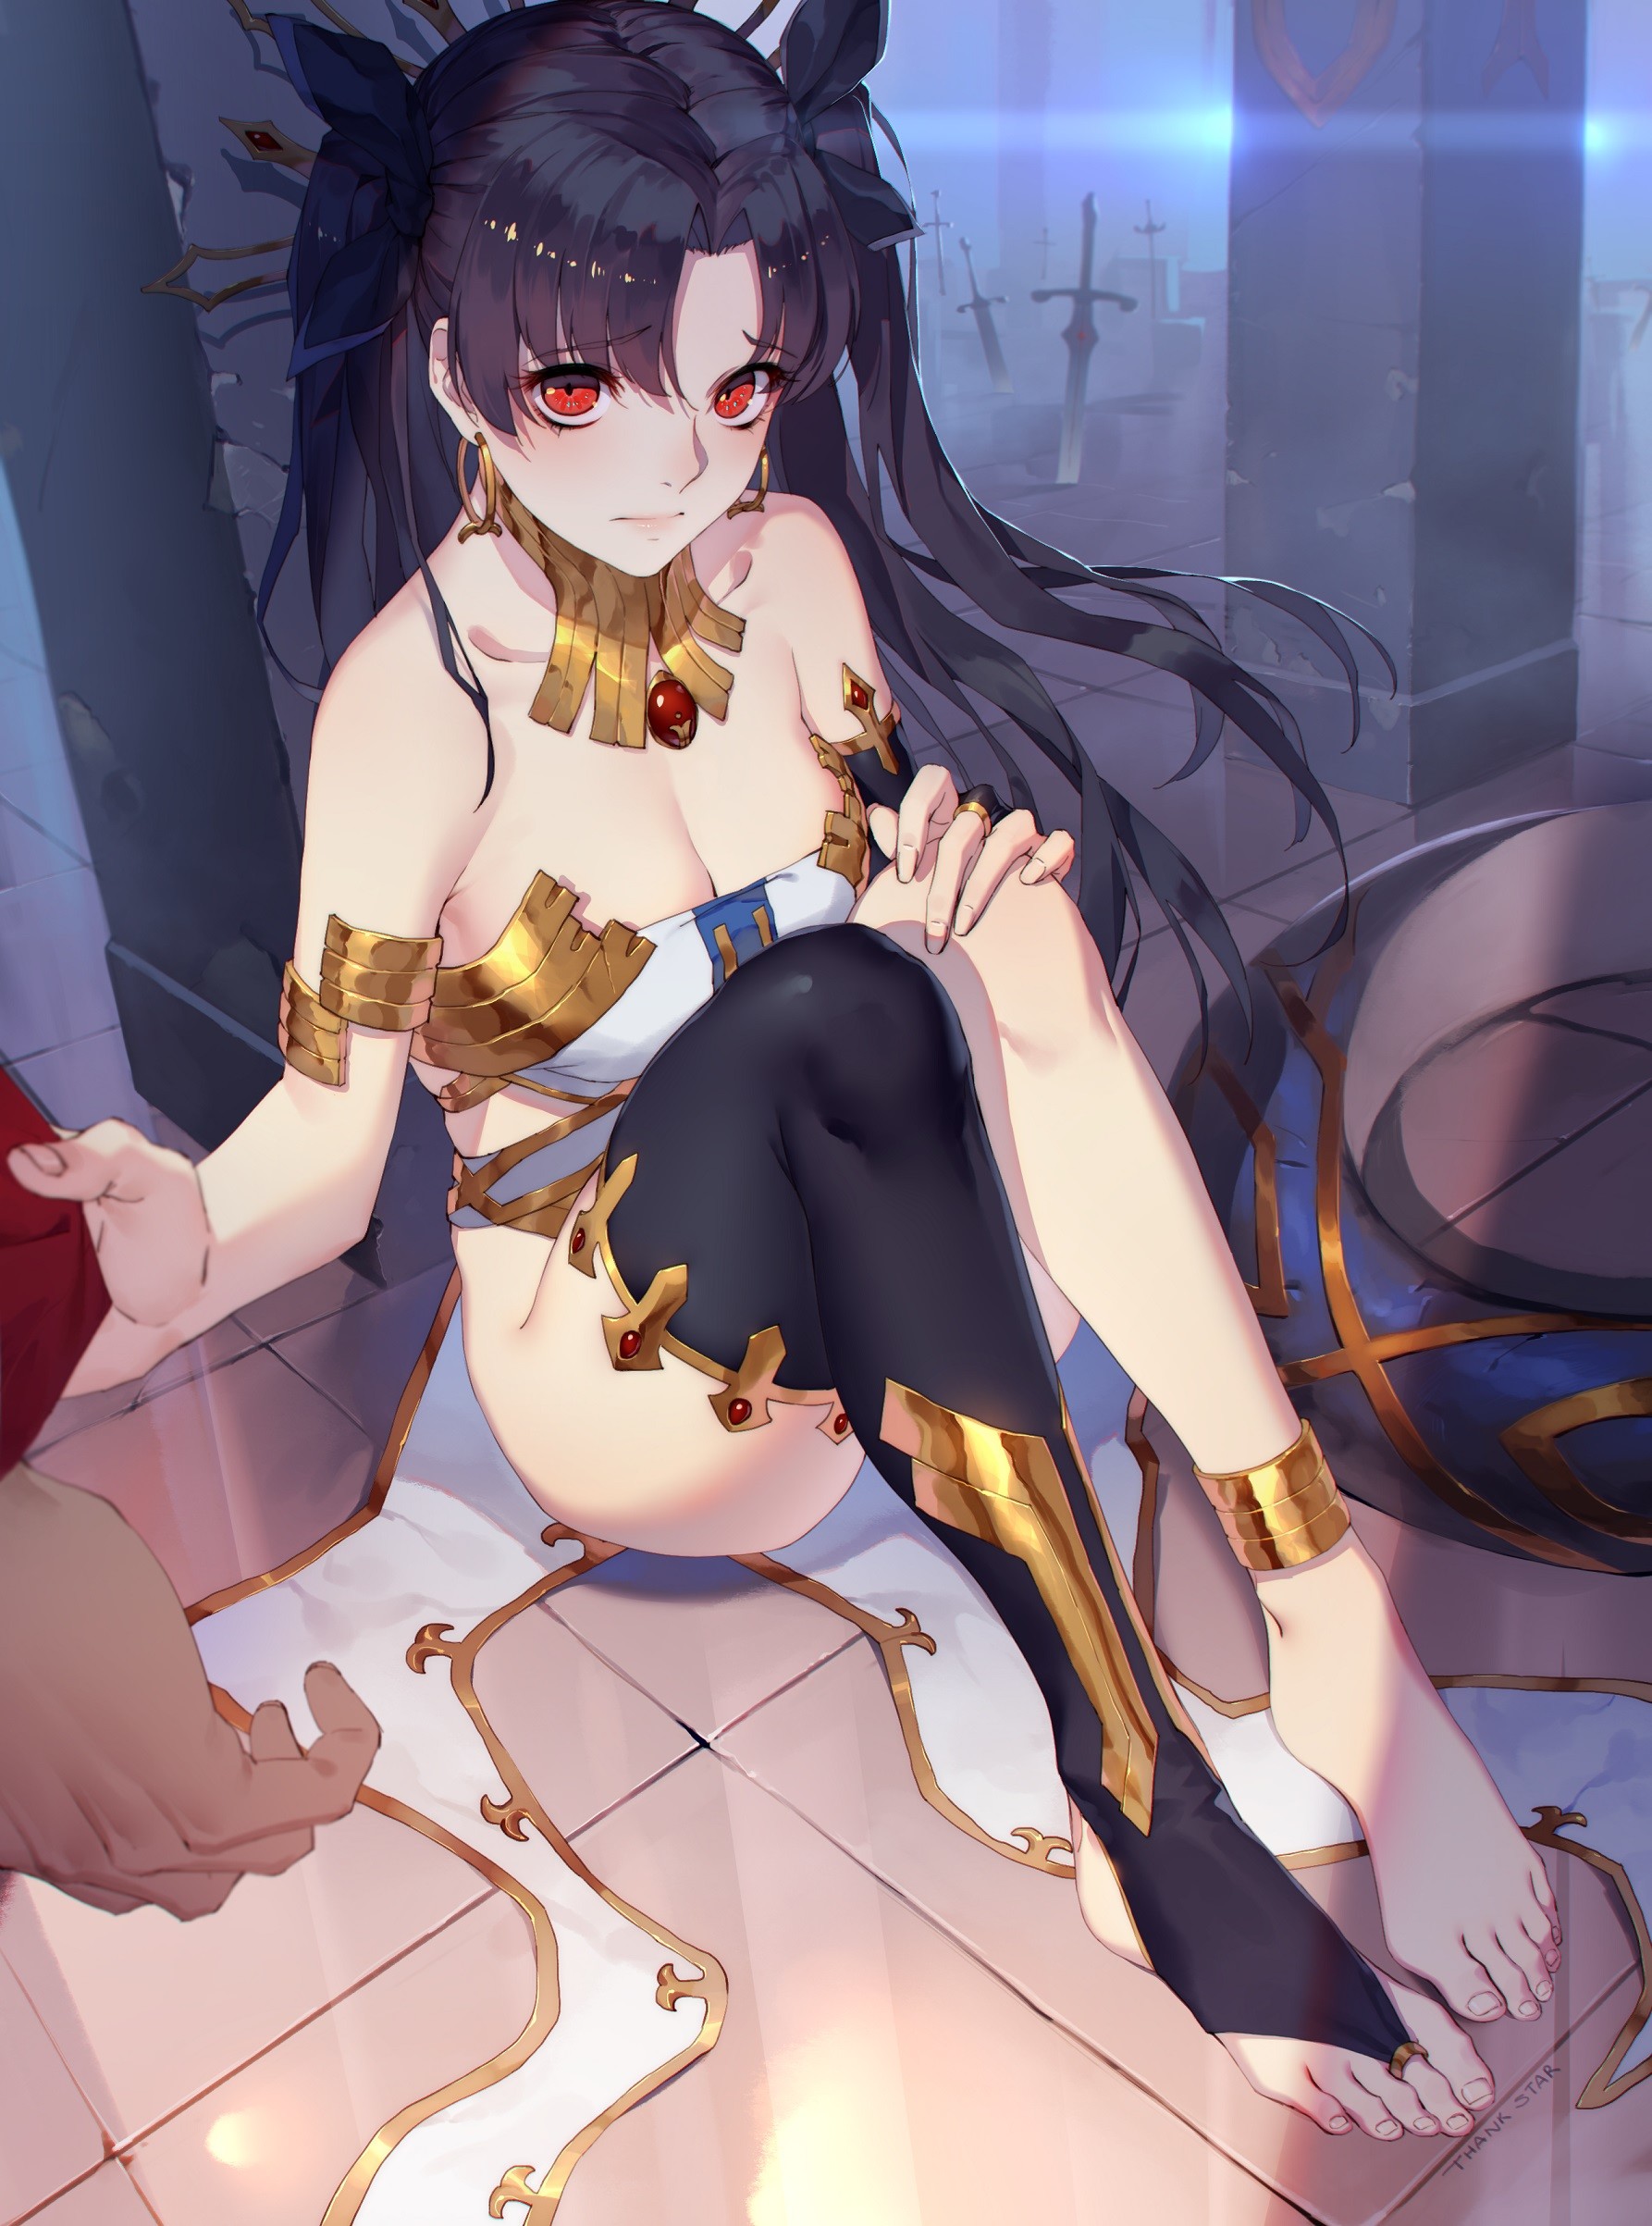 Anime 1786x2406 anime anime girls Fate/Grand Order Ishtar (Fate/Grand Order) missing sock barefoot bare shoulders cleavage dark hair red eyes POV Fate series Thankstar404